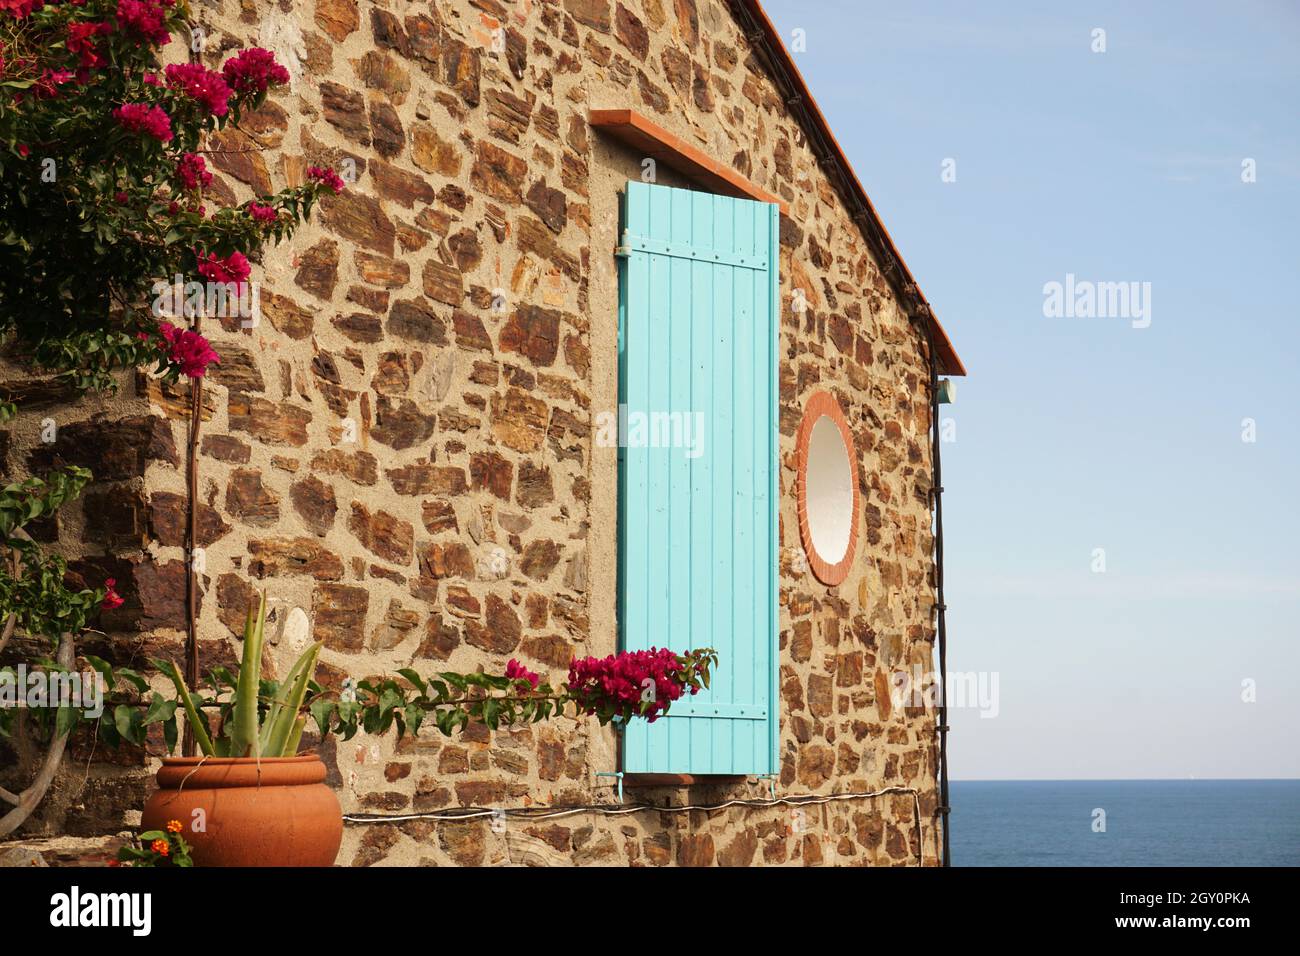 Gable wall of stone house featuring turquoise coloured wooden window shutter and red flowers with Mediterranean sea visible. Collioure, France Stock Photo